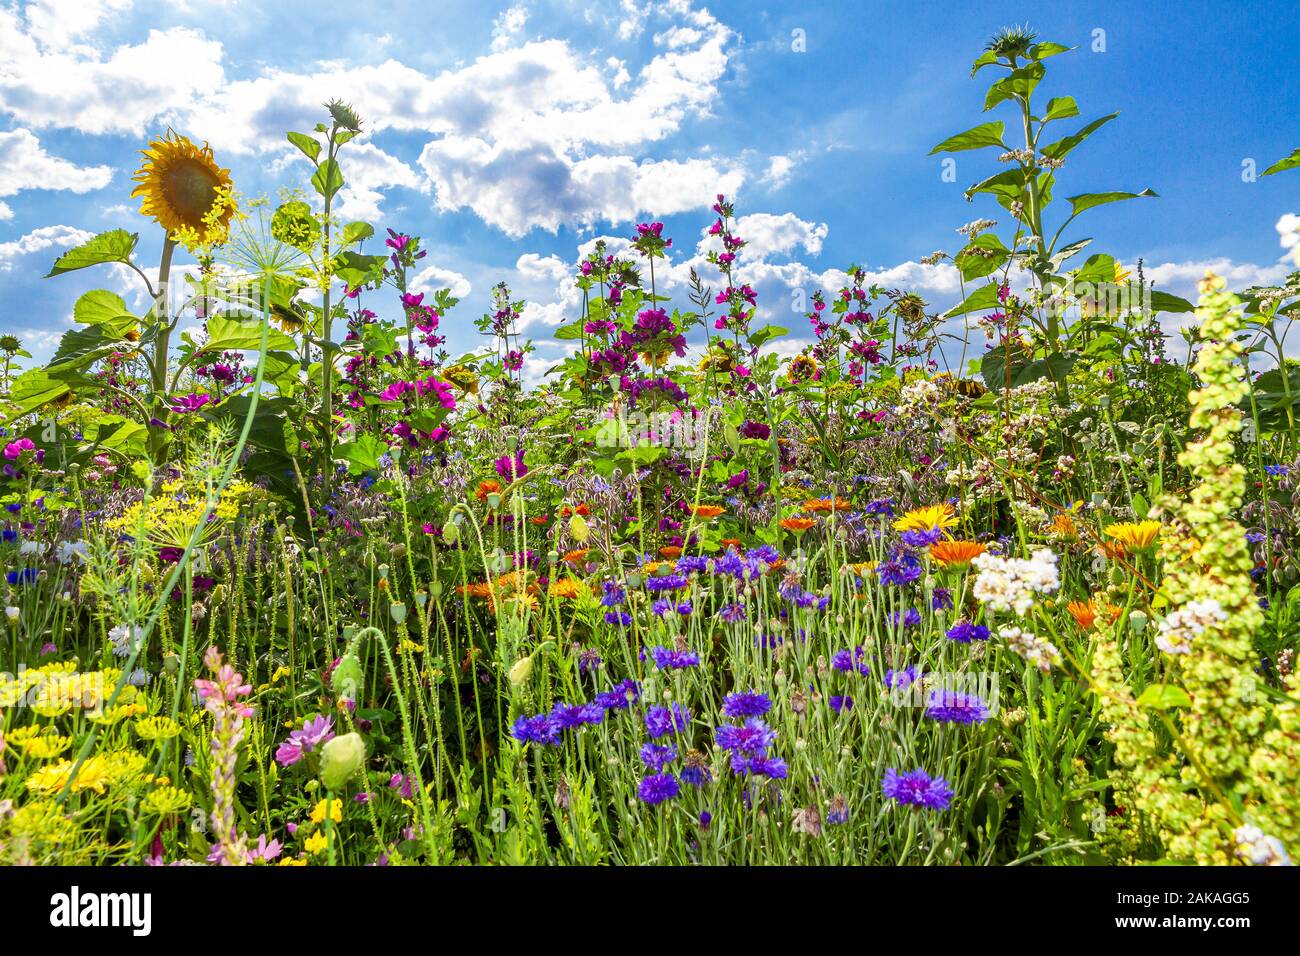 Field with colorful flowers for bees and insects Stock Photo